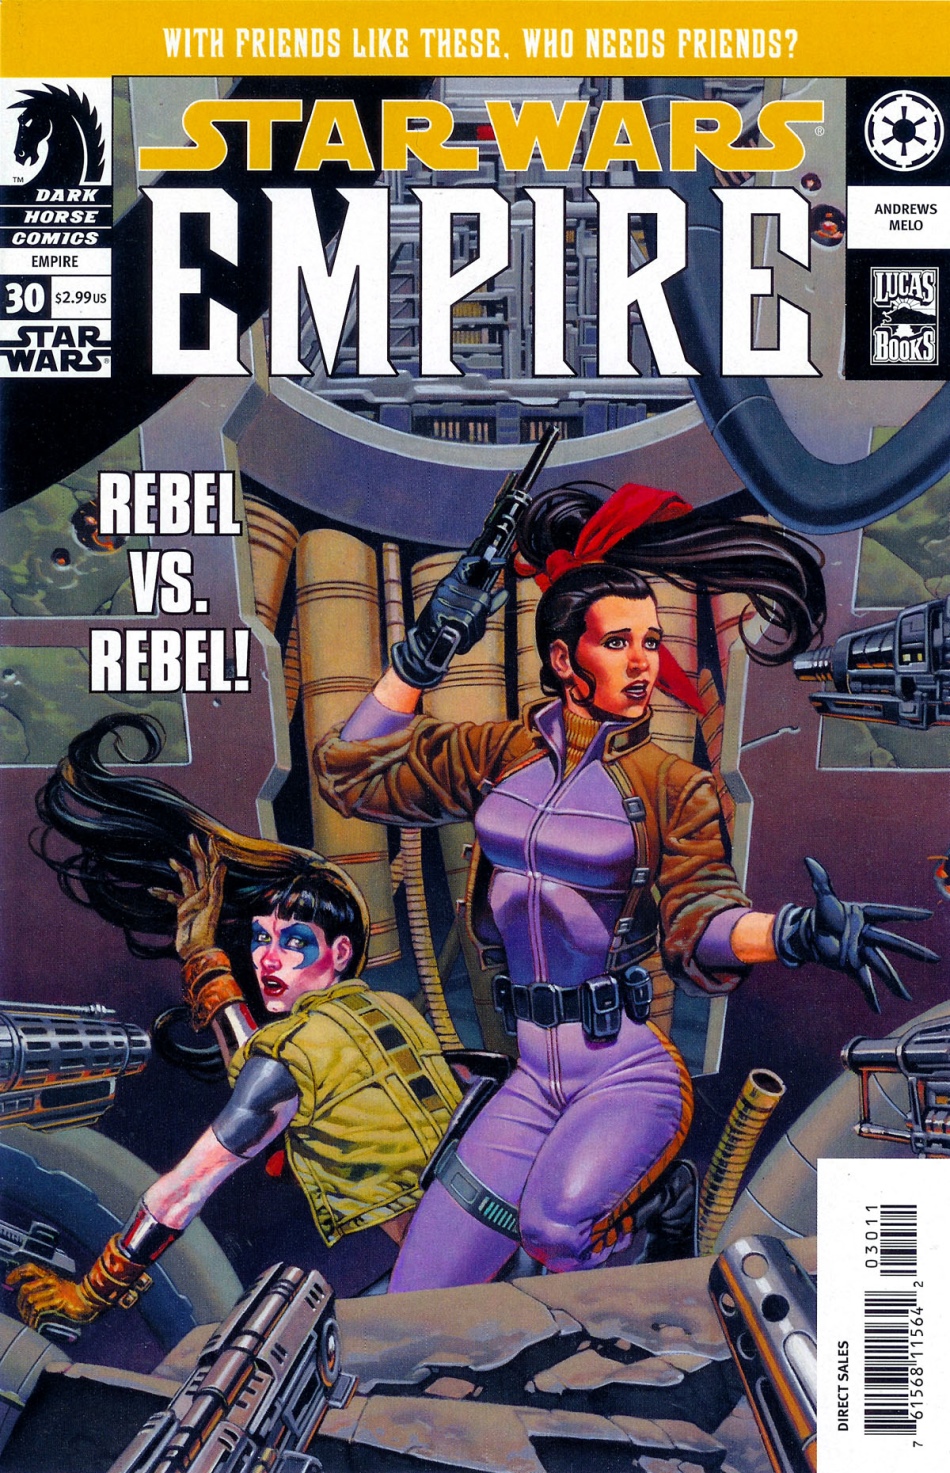 Empire #30: In the Shadows of Their Fathers, Part 2 (27.04.2005)